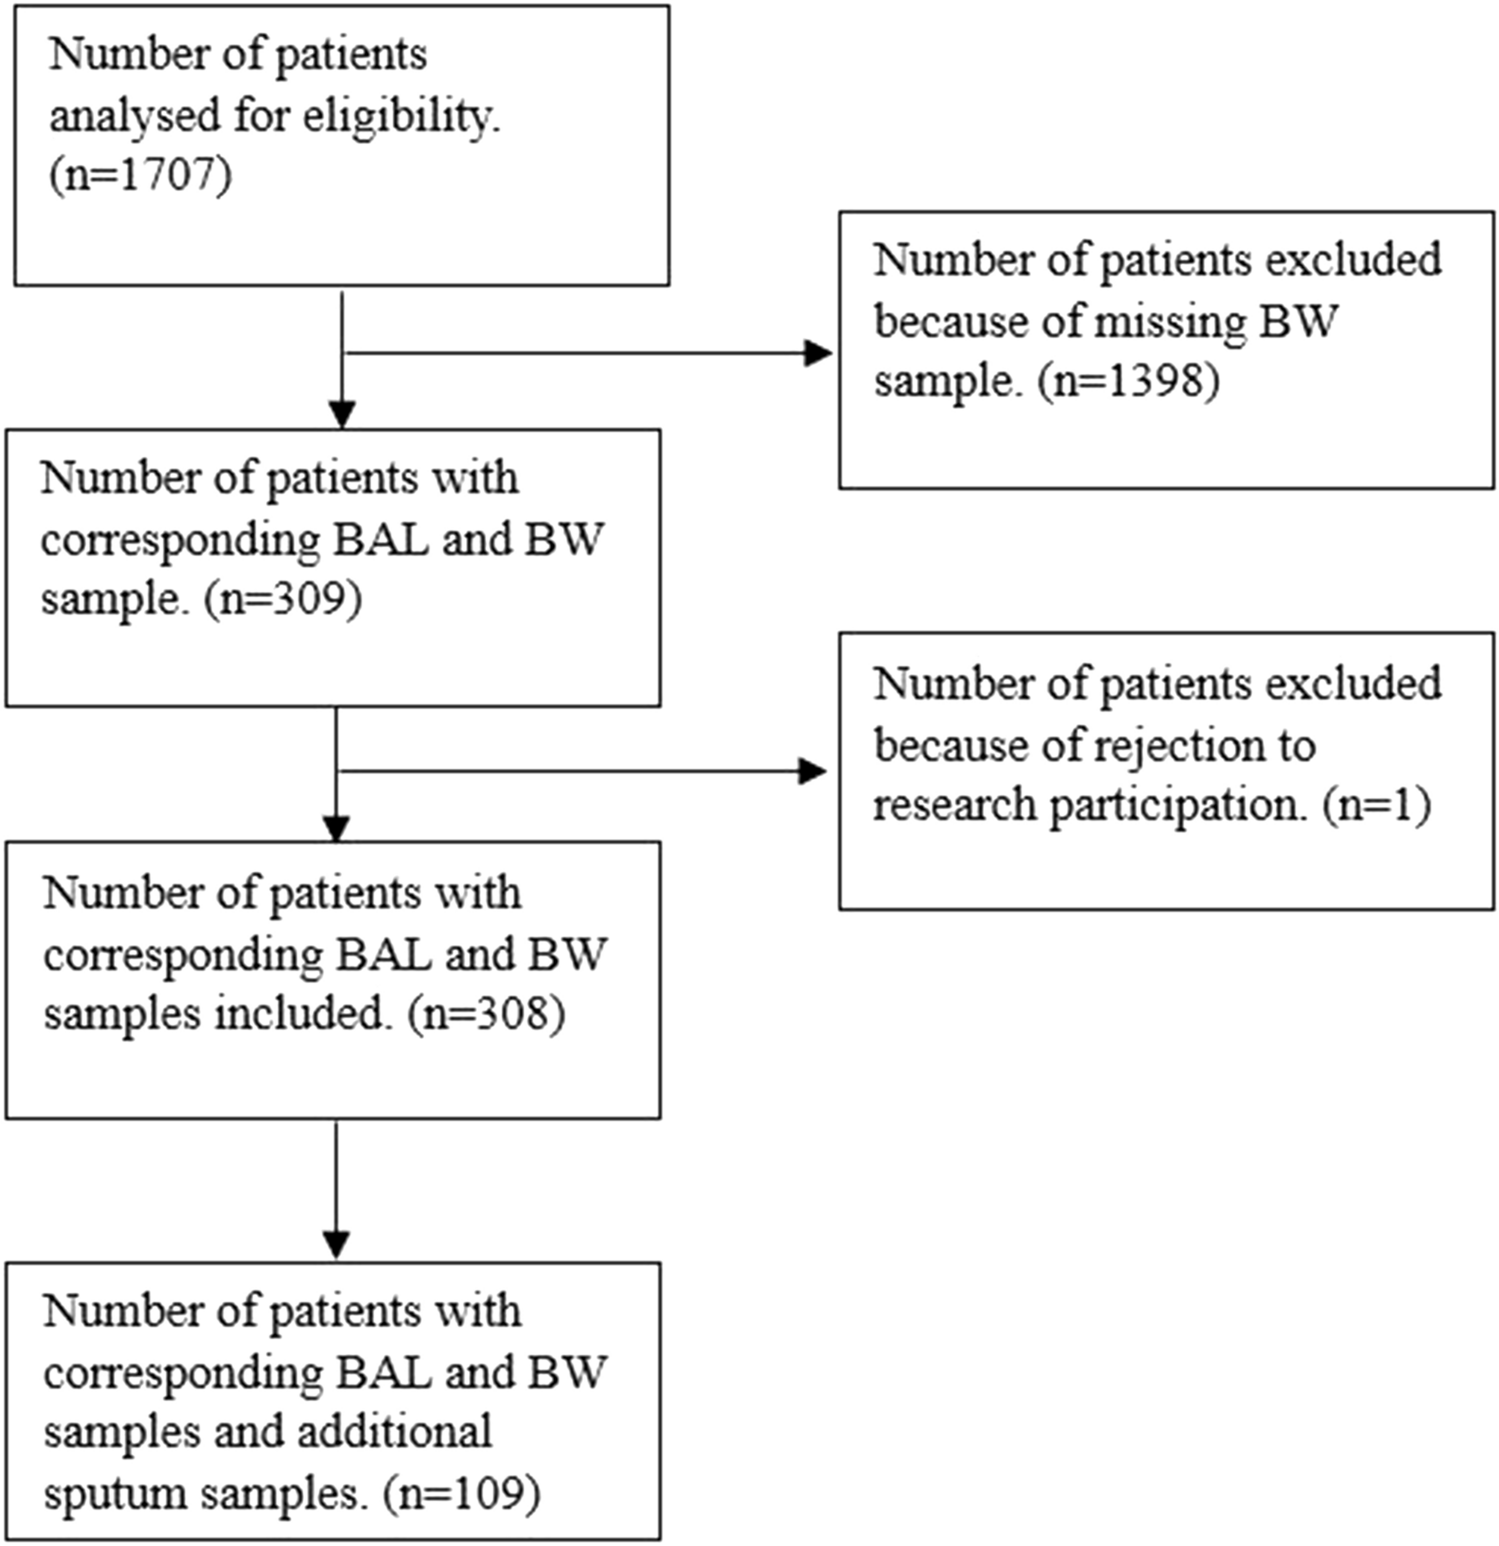 The agreement between bronchoalveolar lavage, bronchial wash and sputum culture: a retrospective study